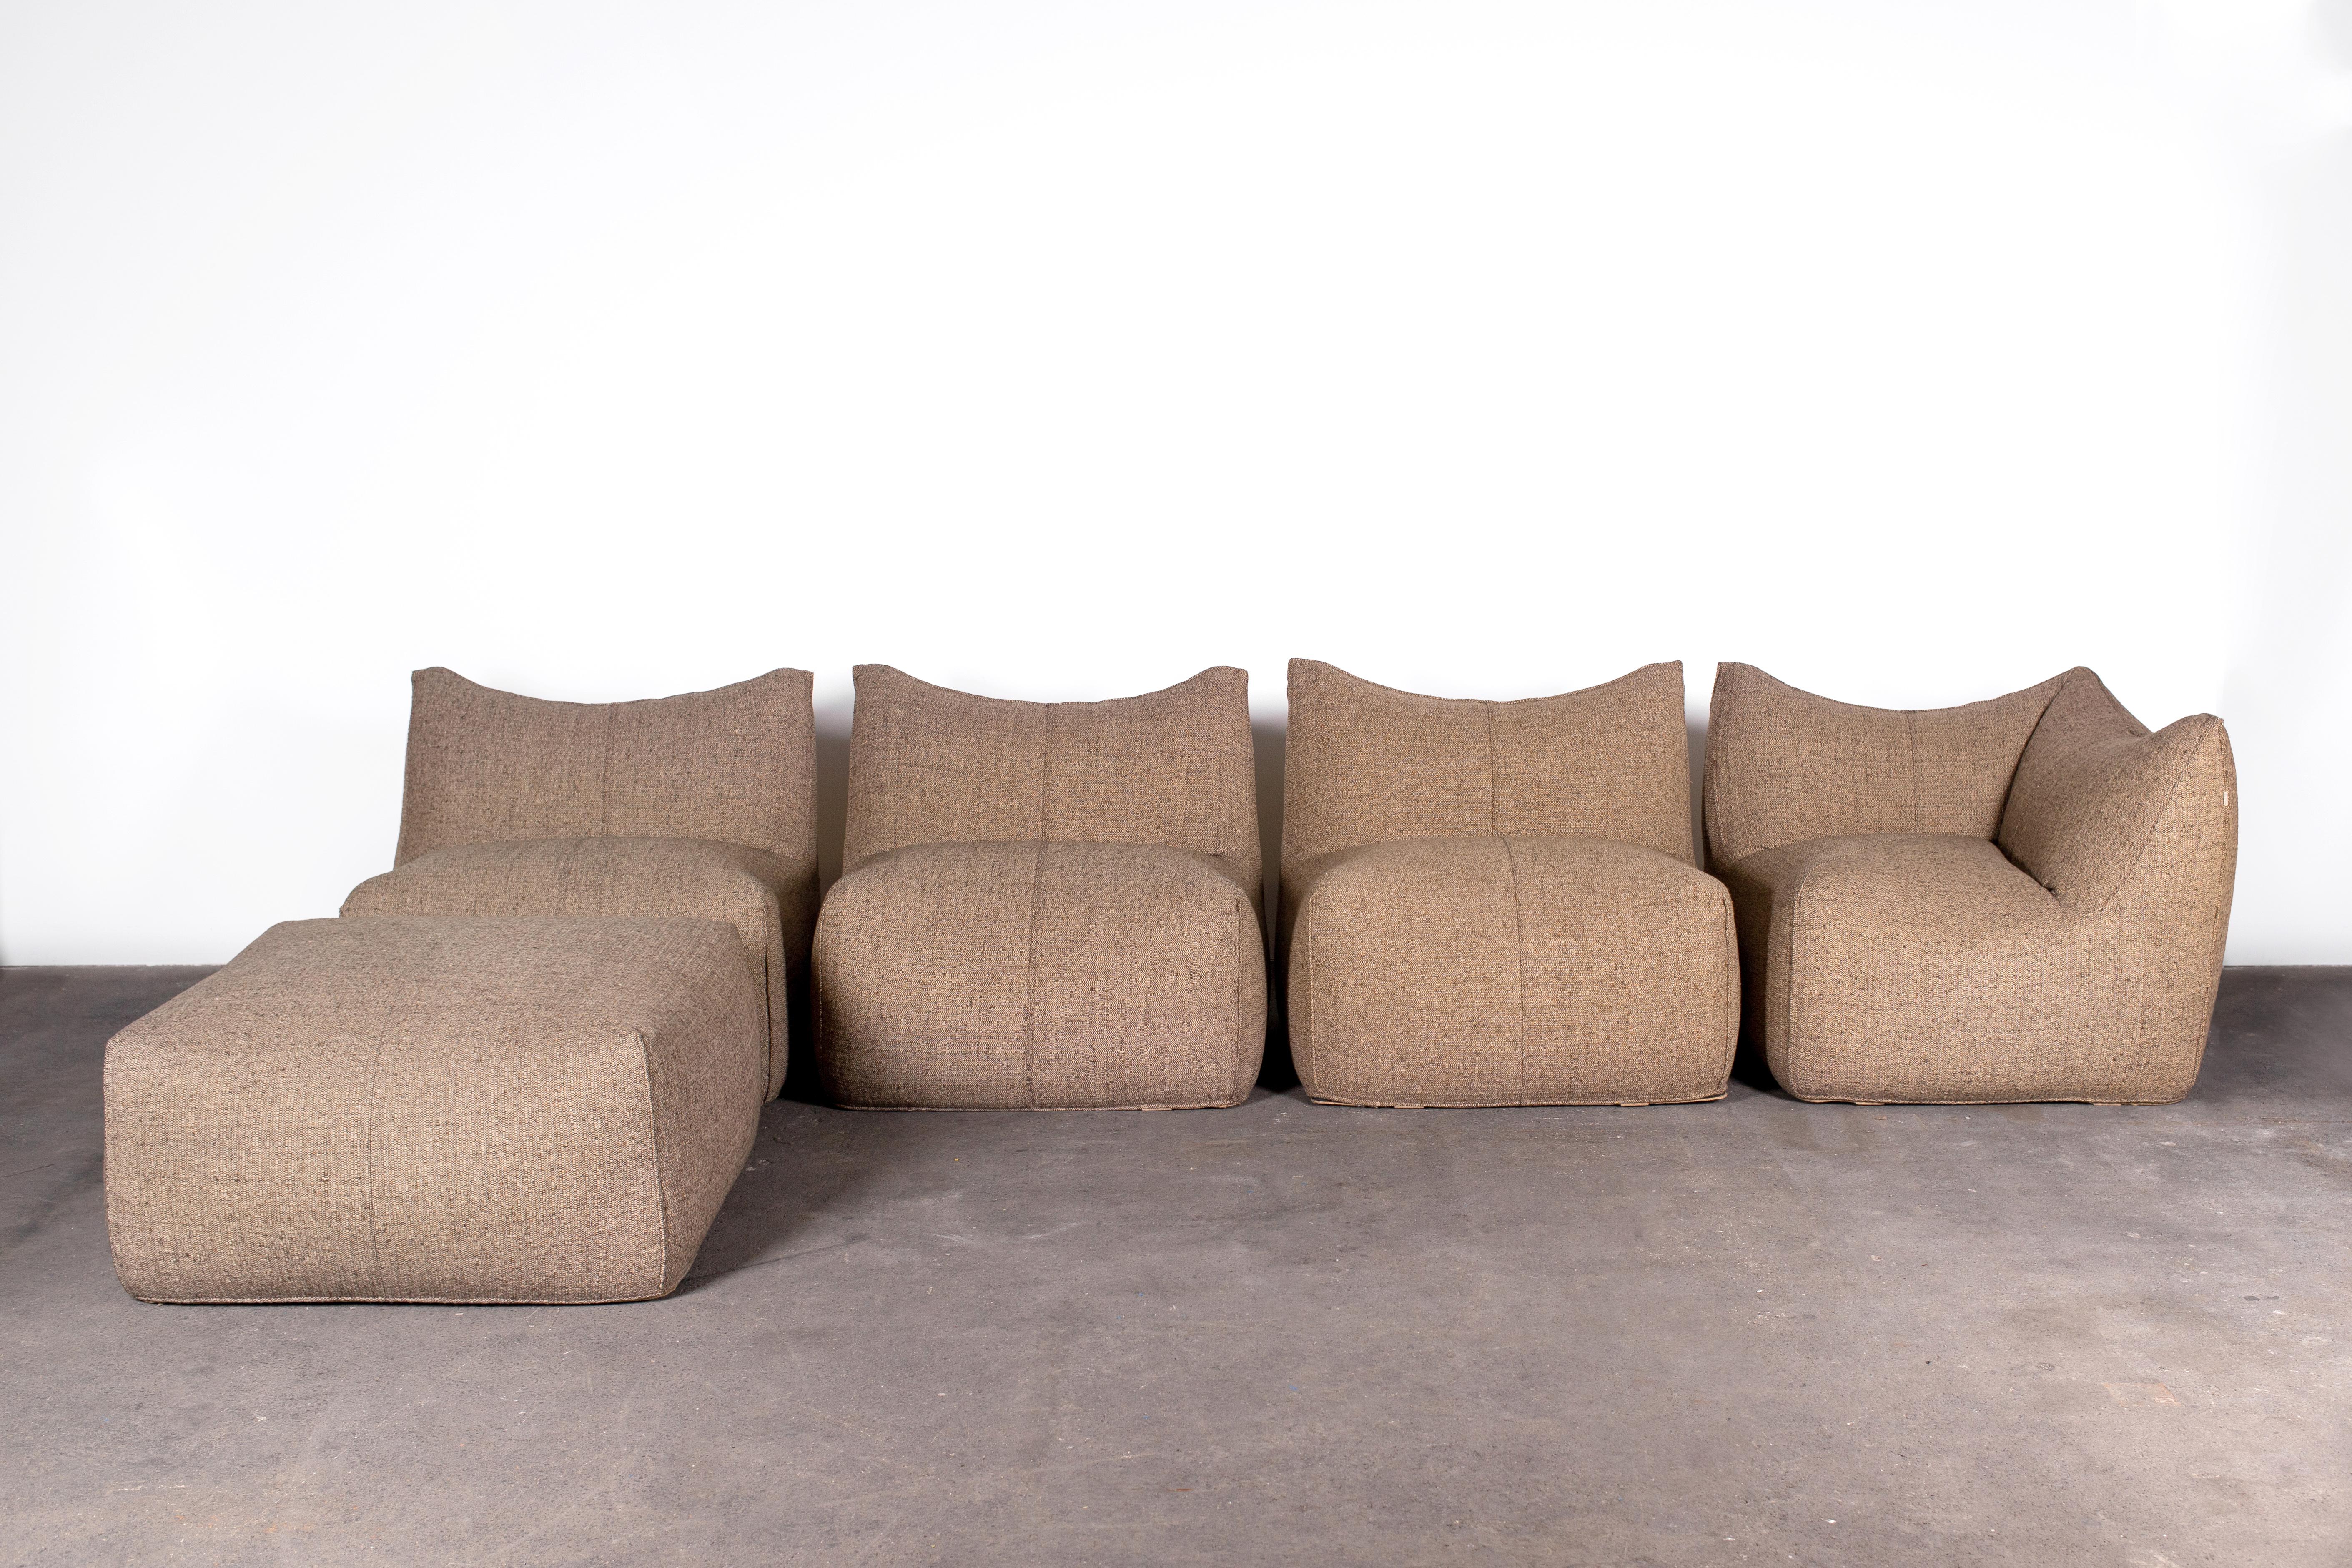 Discover the timeless Organic Modern elegance of the original 1970s Le Bambole  Italian sofa set with beige woven wool upholstery in superb condition. A Mid-Century Modern Italian masterpiece by the renowned Italian designer Mario Bellini and